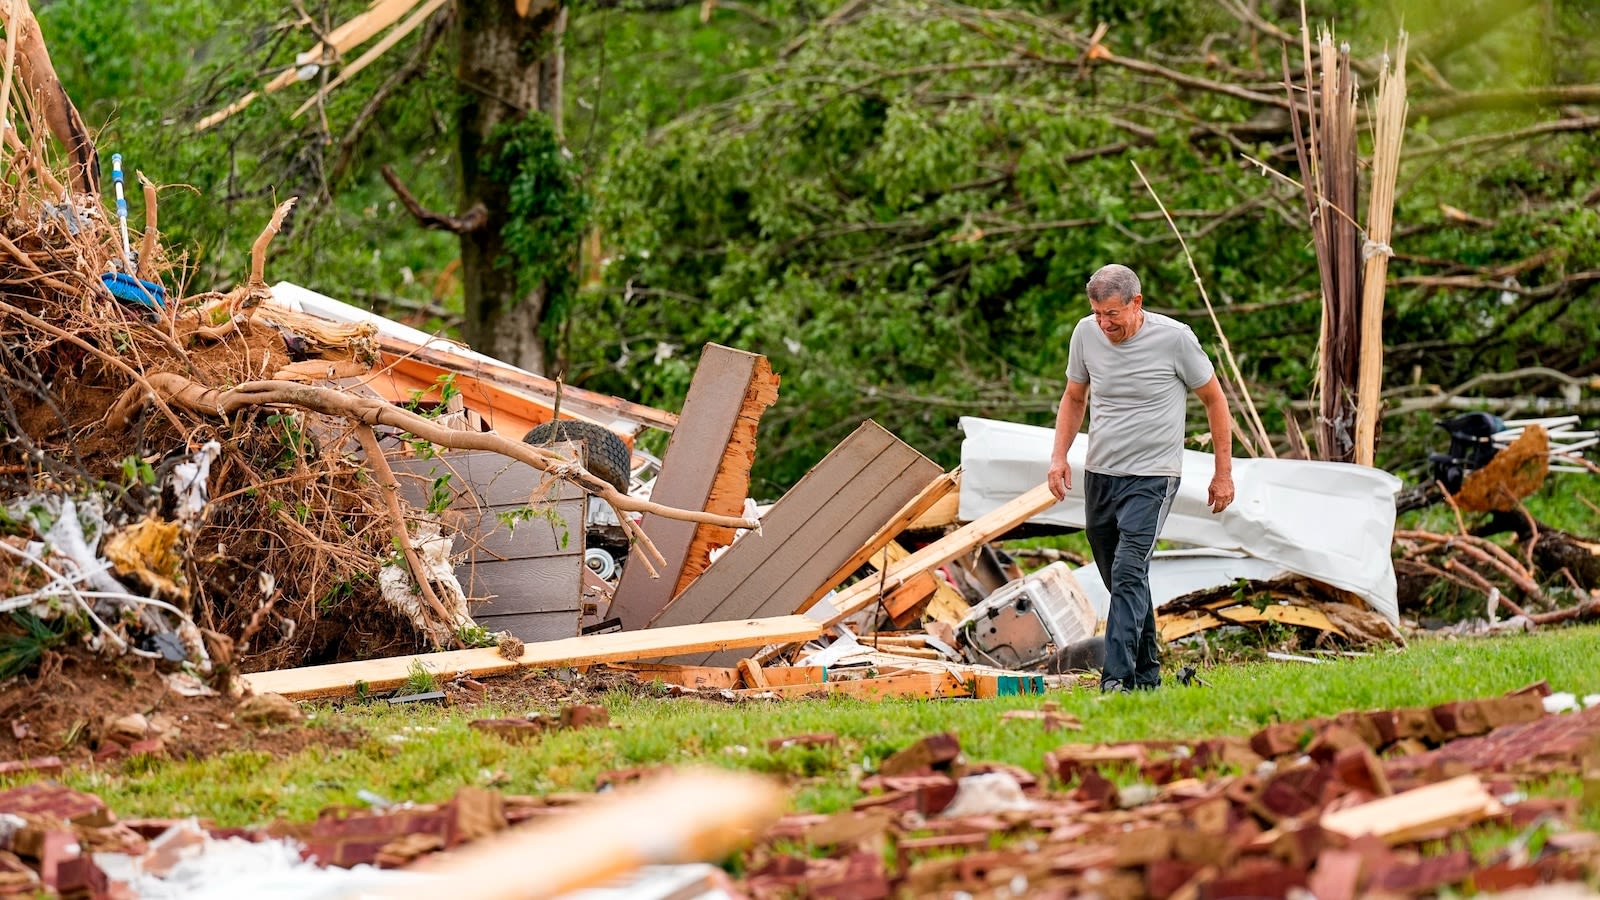 Tornadoes strike across 7 states with more severe weather on the way